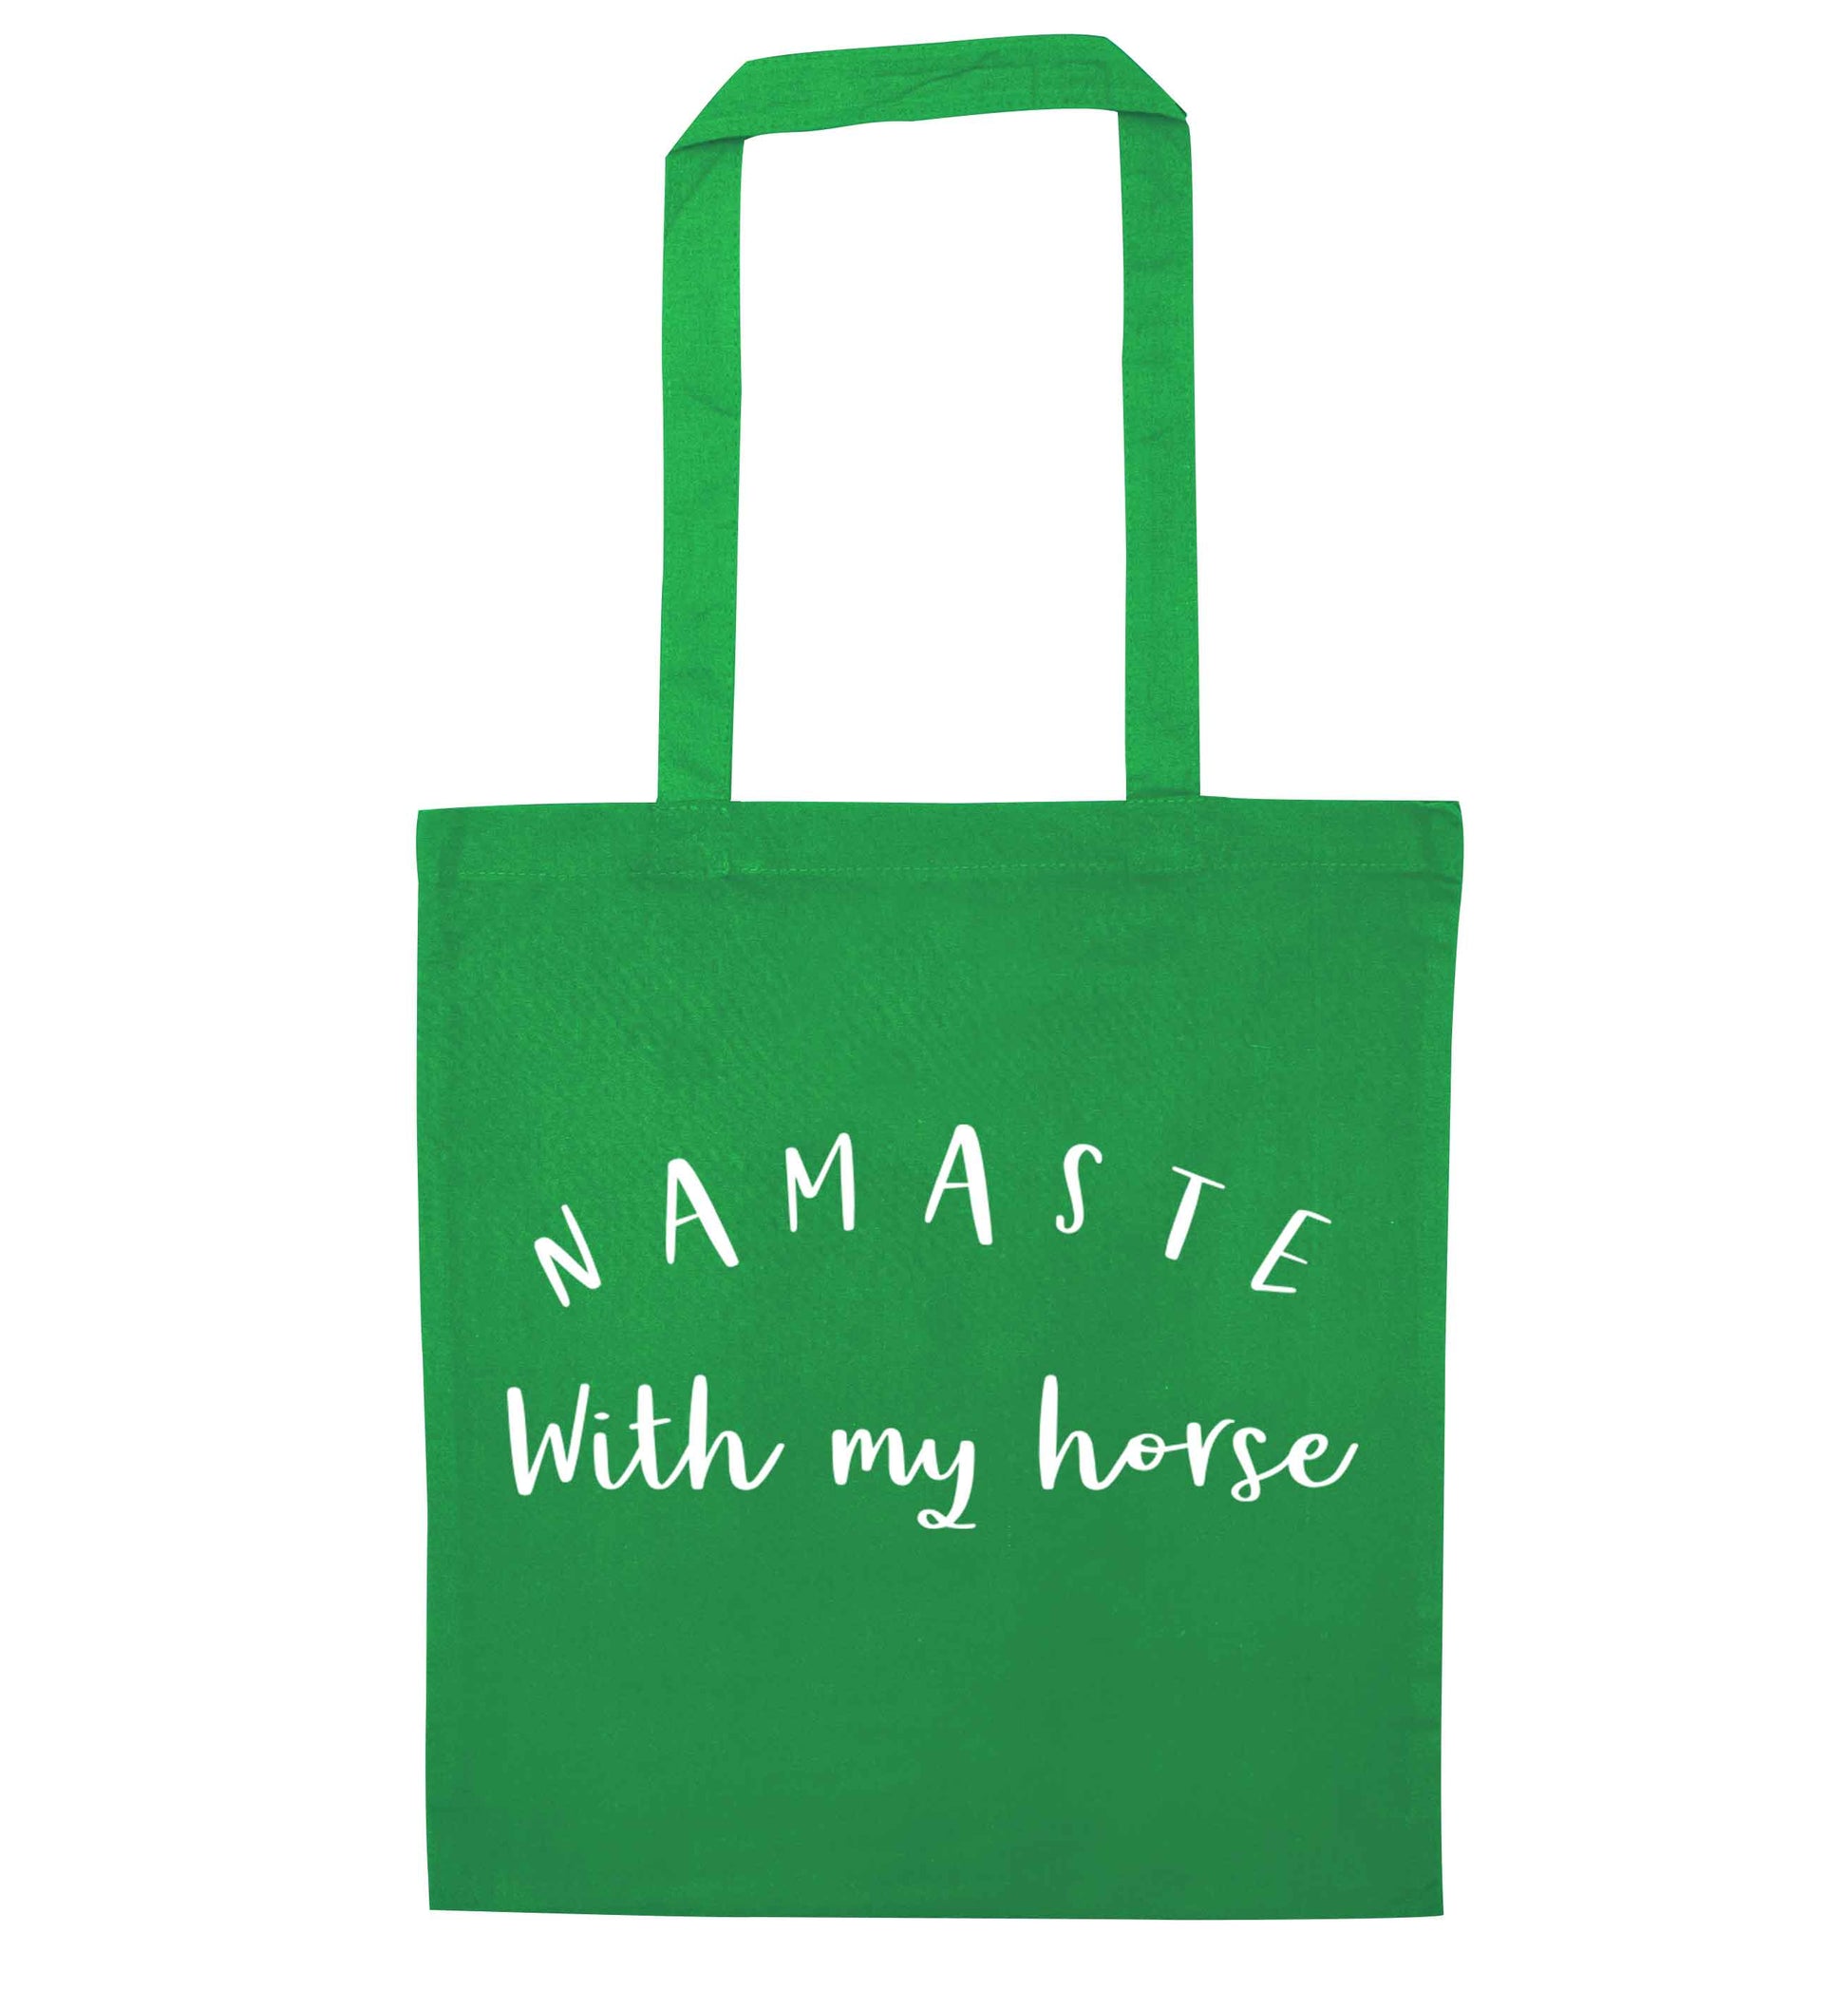 Namaste with my horse green tote bag